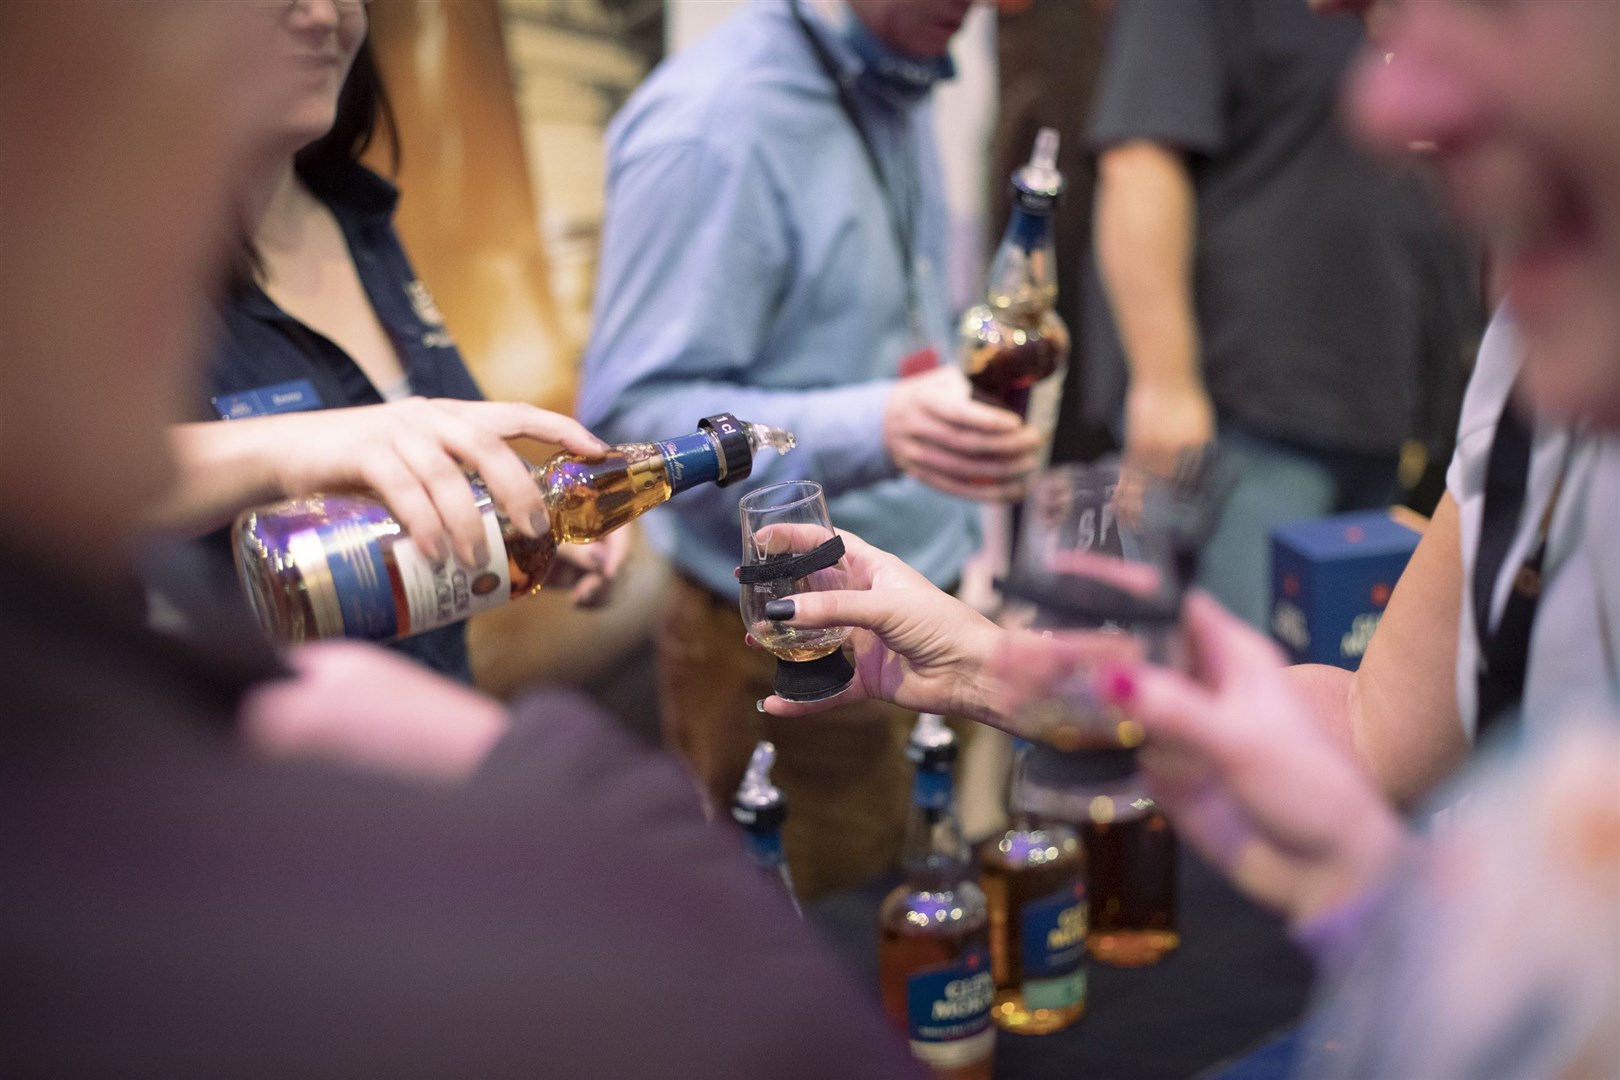 Hundreds of whiskies will be available to try on the day.